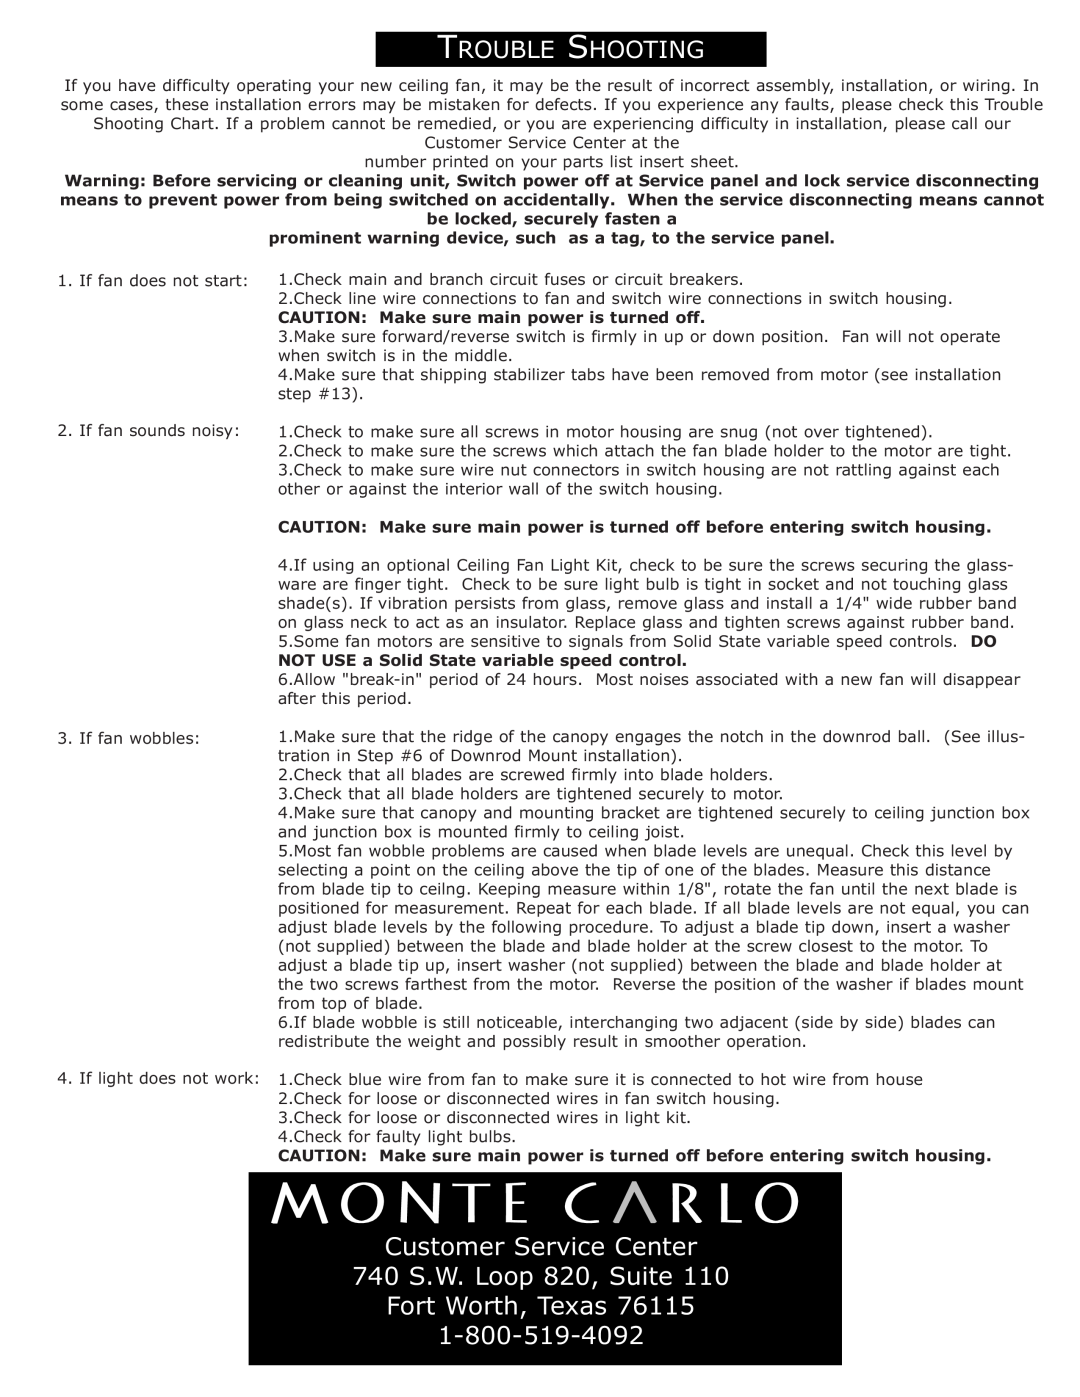 Monte Carlo Fan Company 5OR52XXD installation instructions Customer Service Center 740 S.W. Loop 820, Suite, Rouble Hooting 